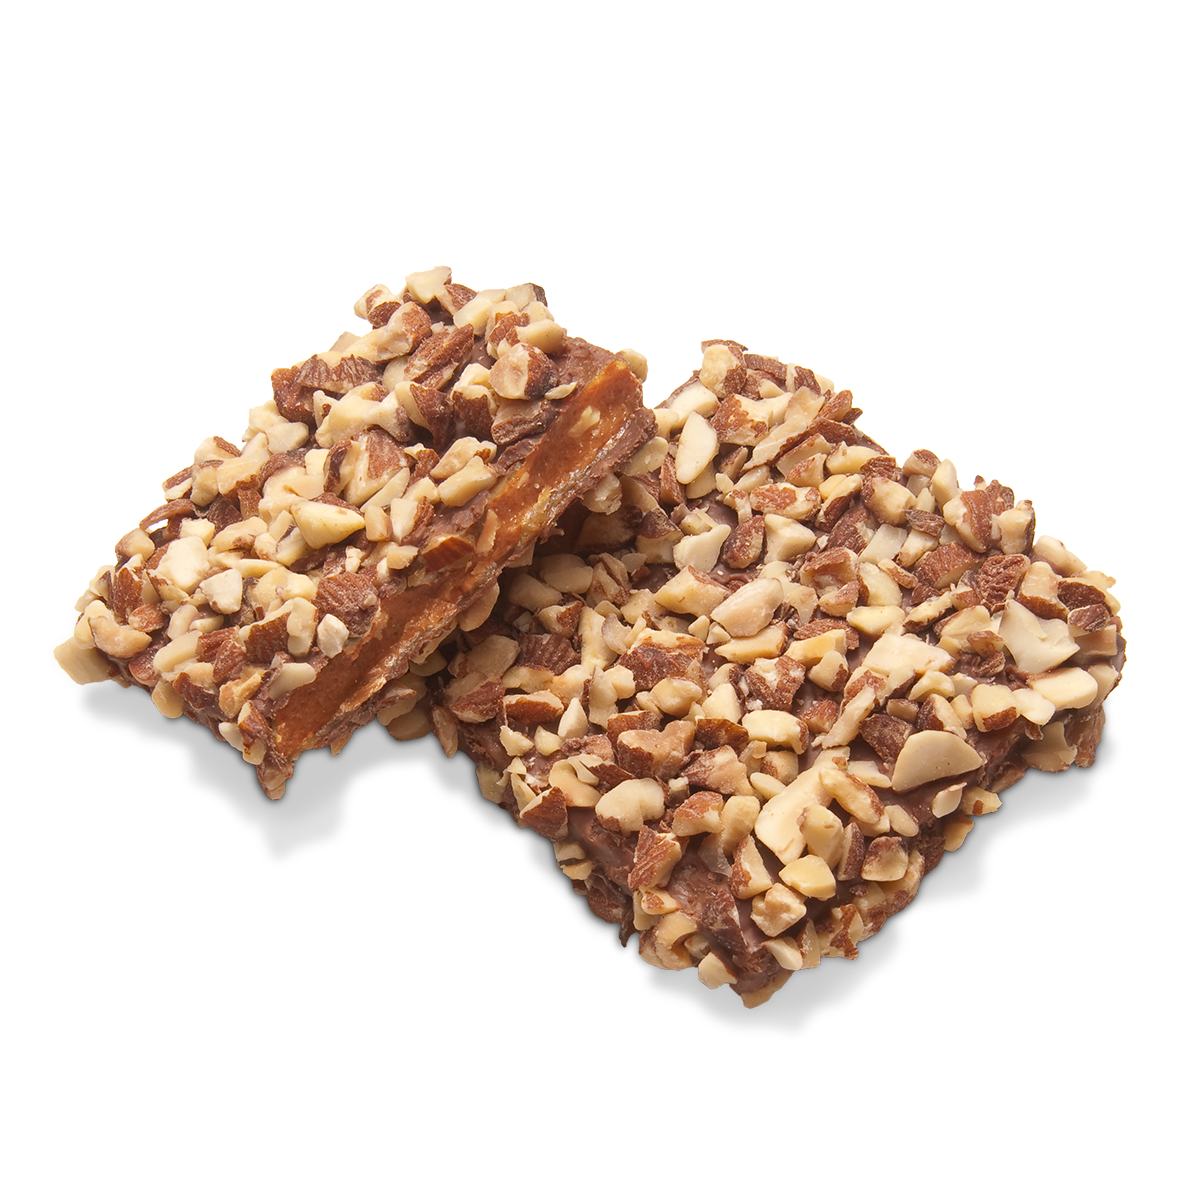 Gourmet English Toffee - rmcfshop